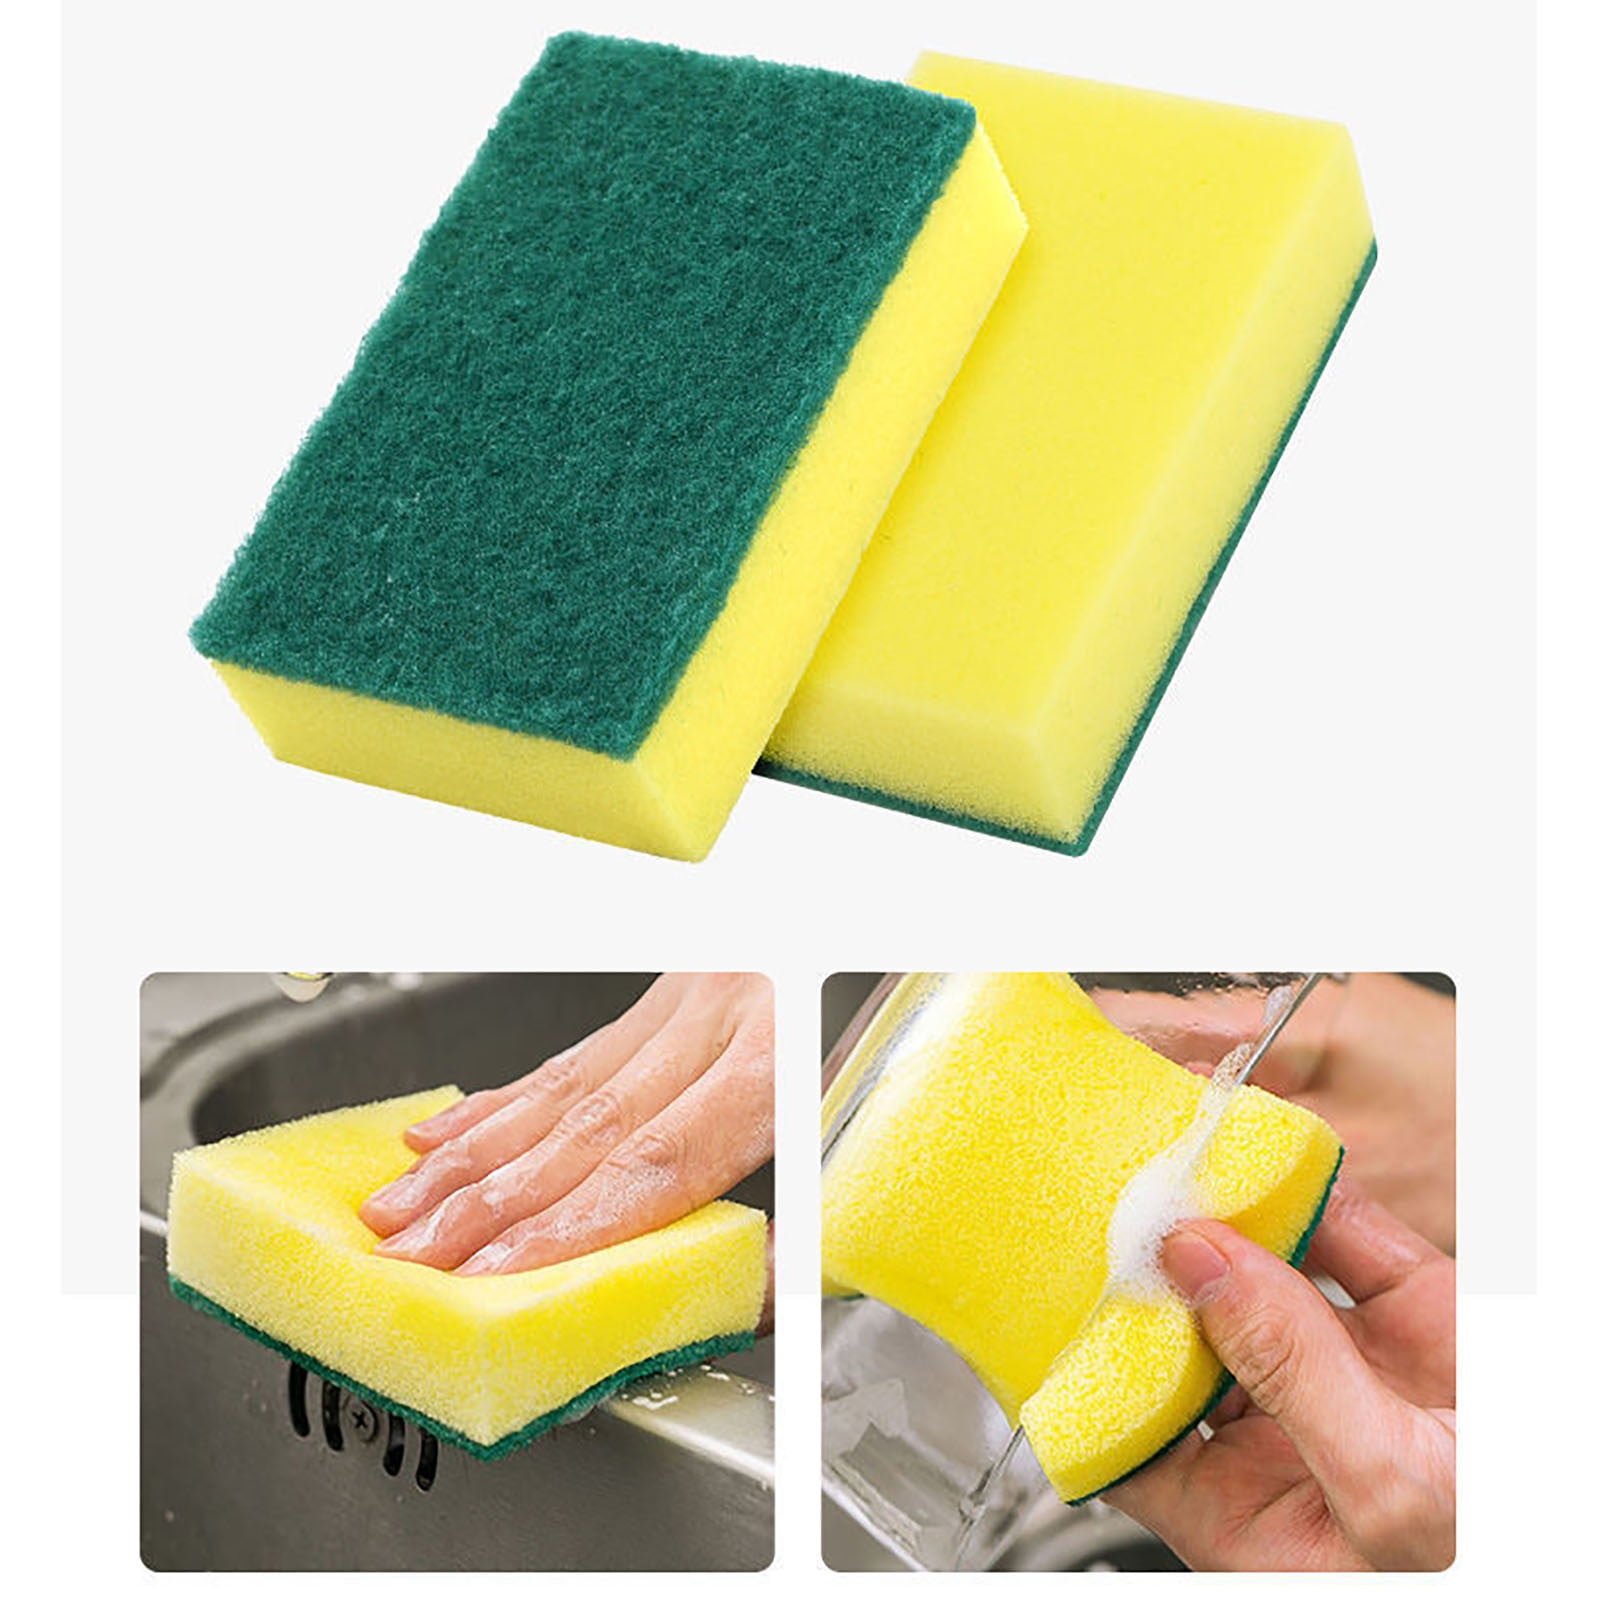 Baofu Kitchen Cleaning Sponges Eco Non-Scratch for Dish Scrub Sponges